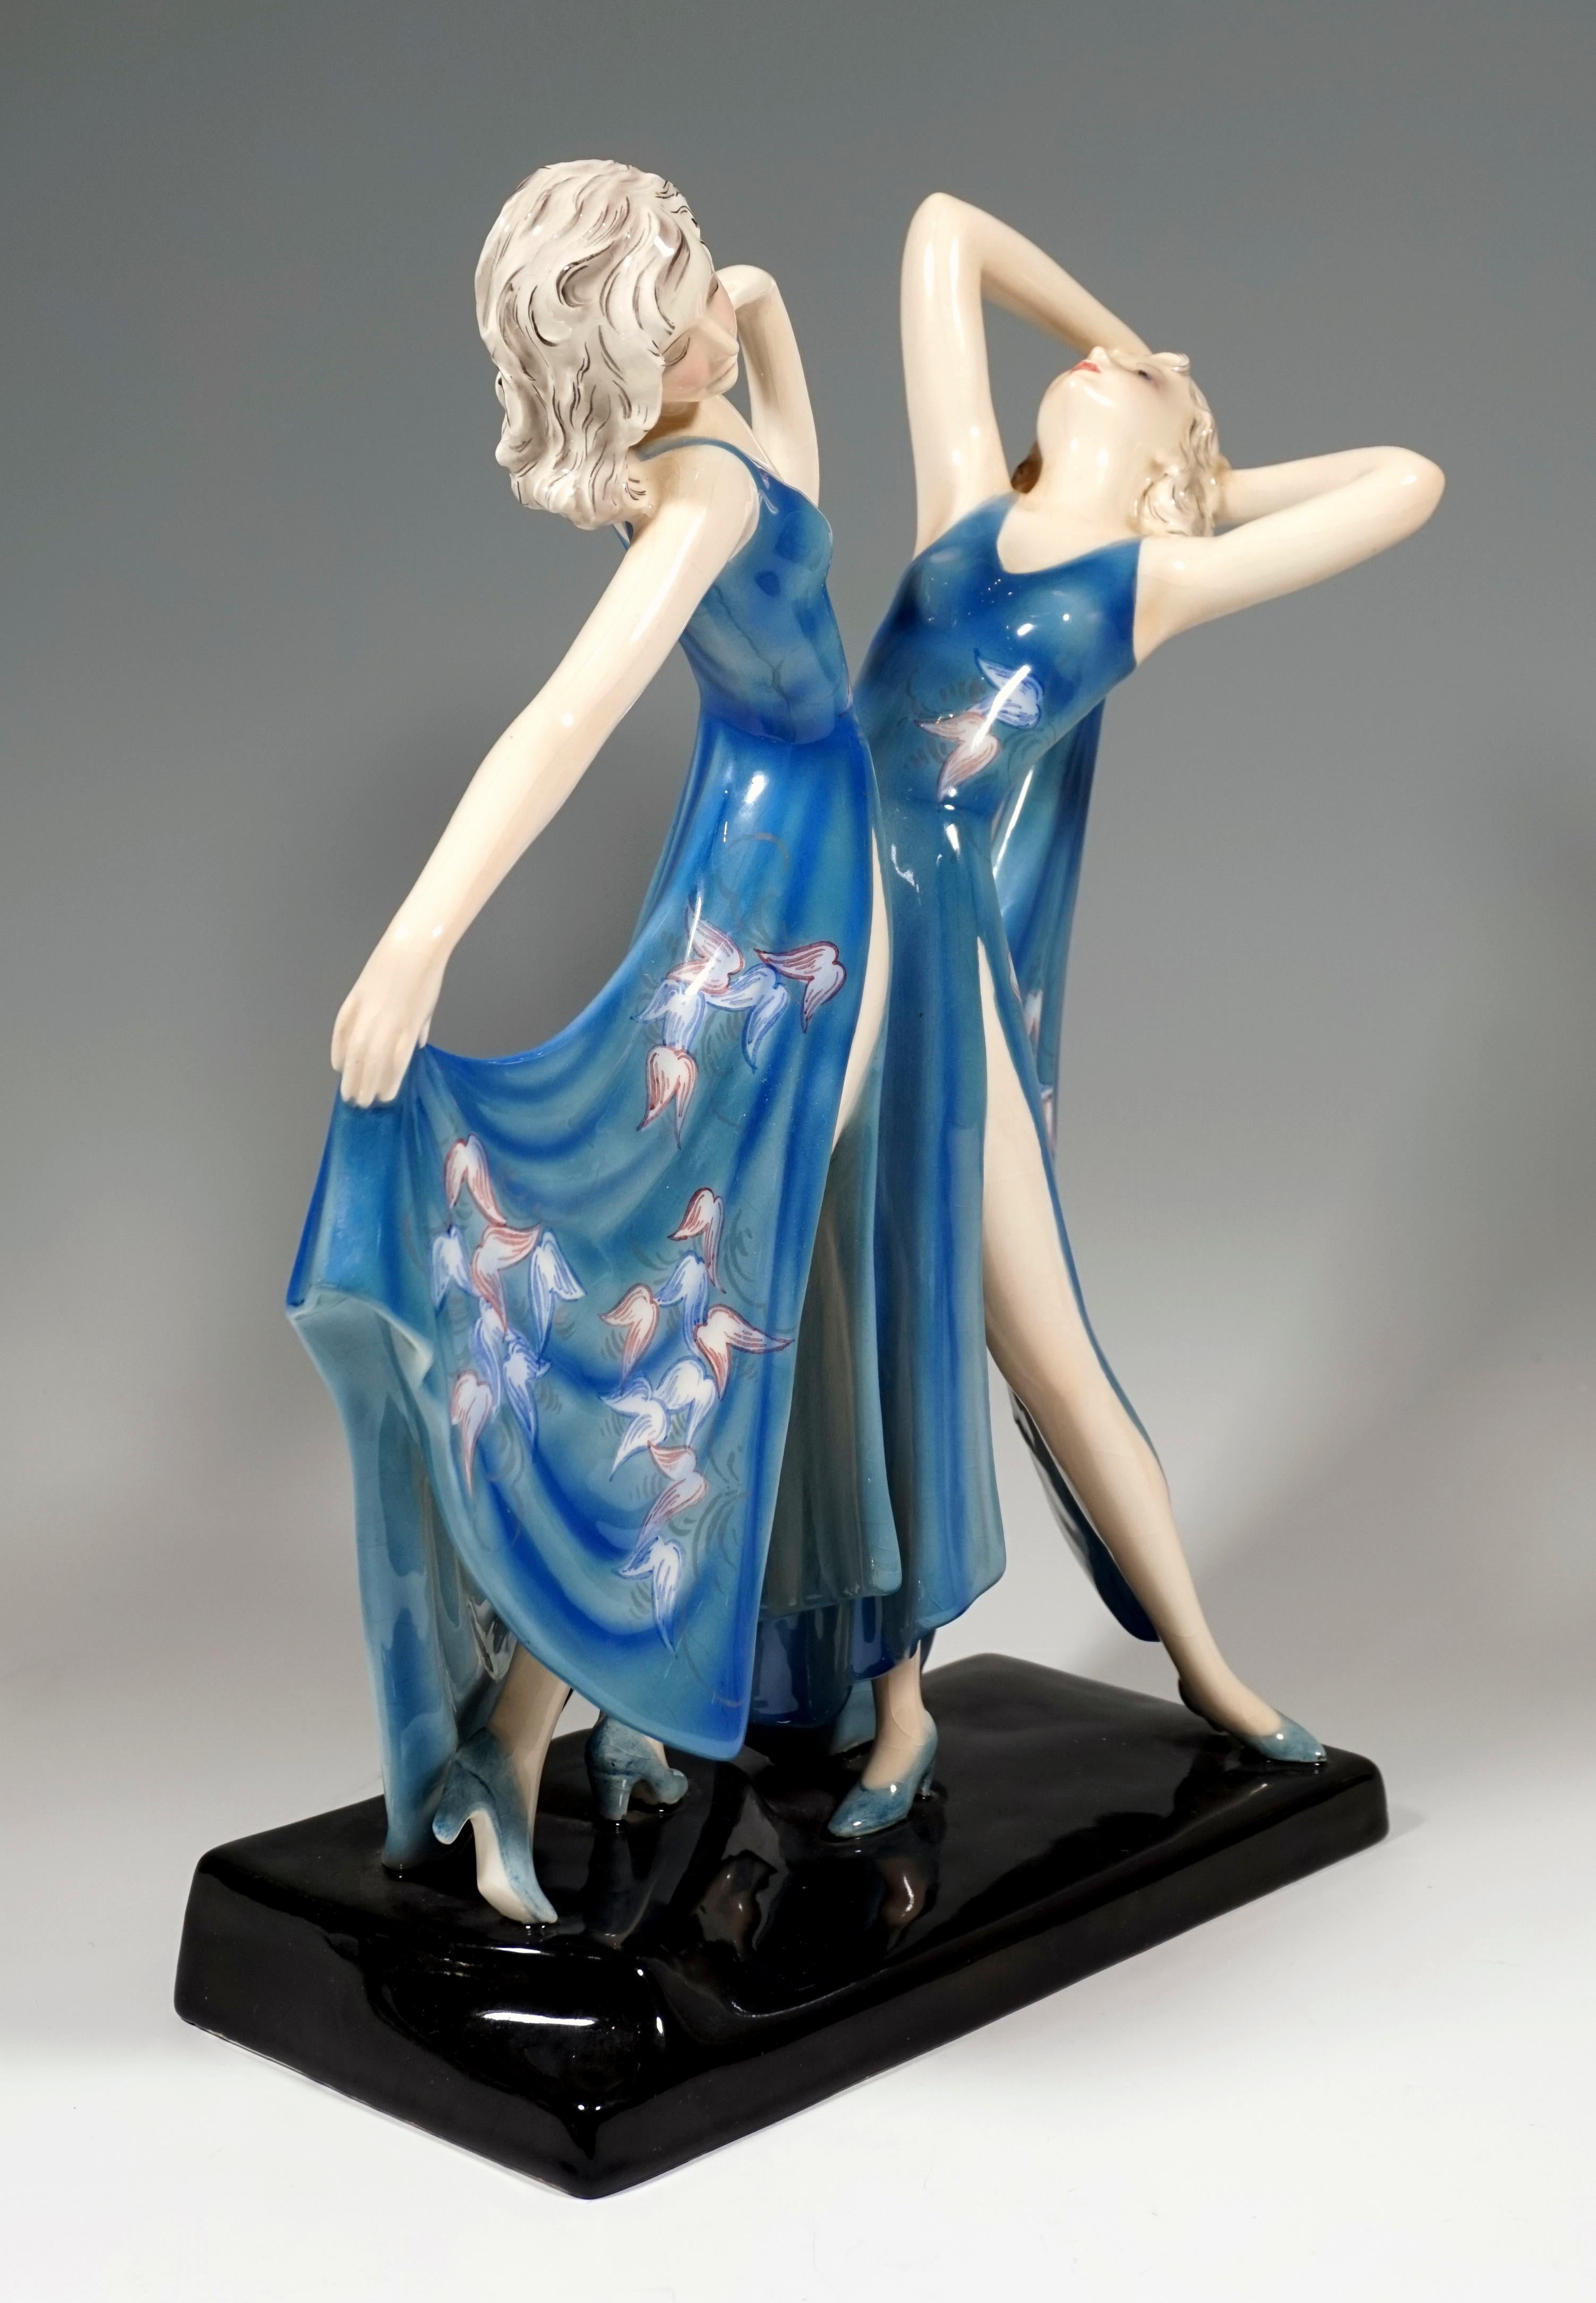 Rare Viennese ceramic Art from the 1930s:
Two graceful dancers in long, deeply cut and high slit blue dresses with floral decorations, facing each other with their upper bodies leaning back and holding the skirt ends performing a dance pose.
On a